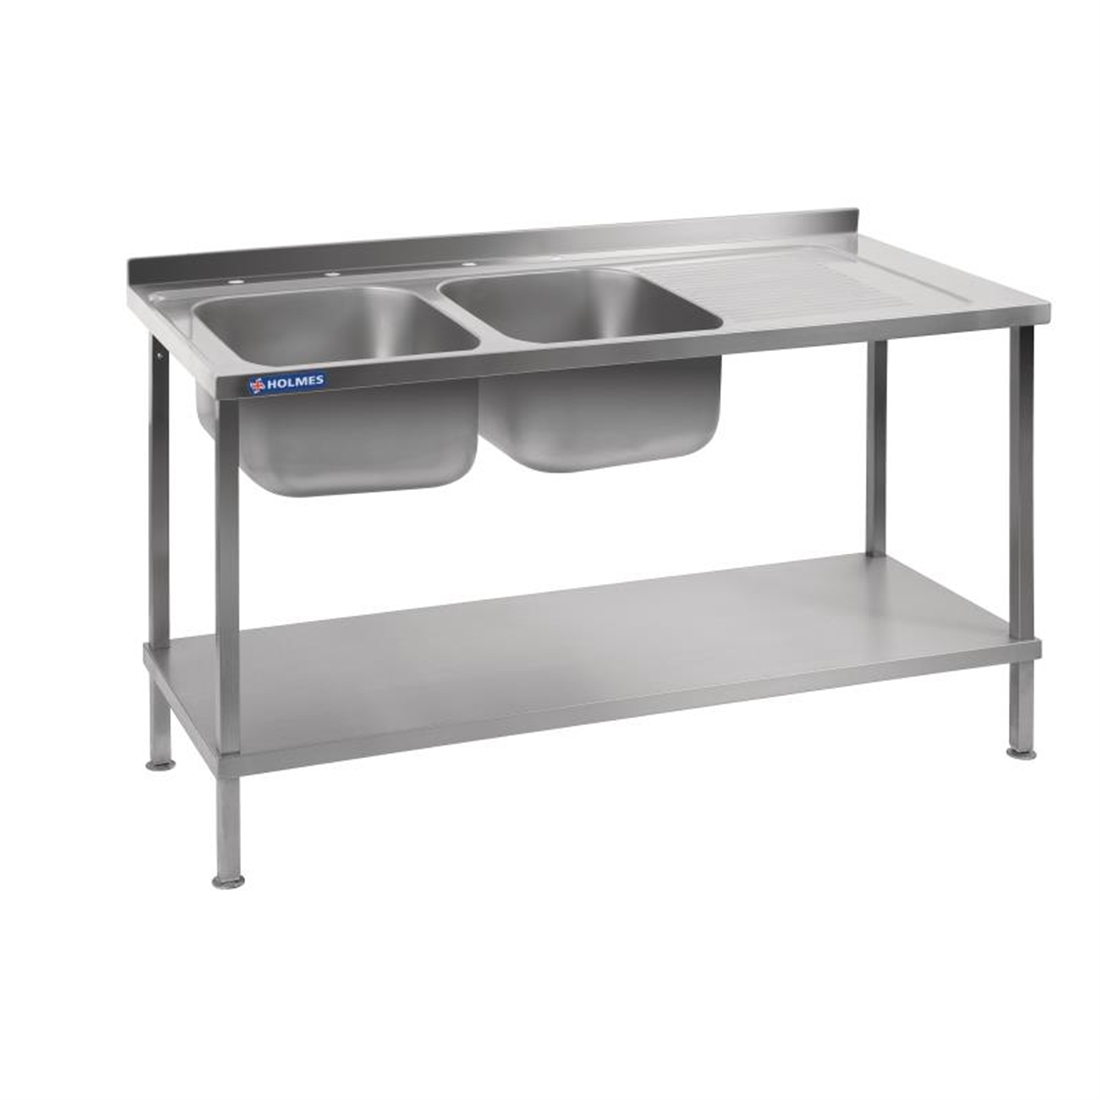 Holmes Self Assembly Stainless Steel Sink Right Hand Drainer 1500mm